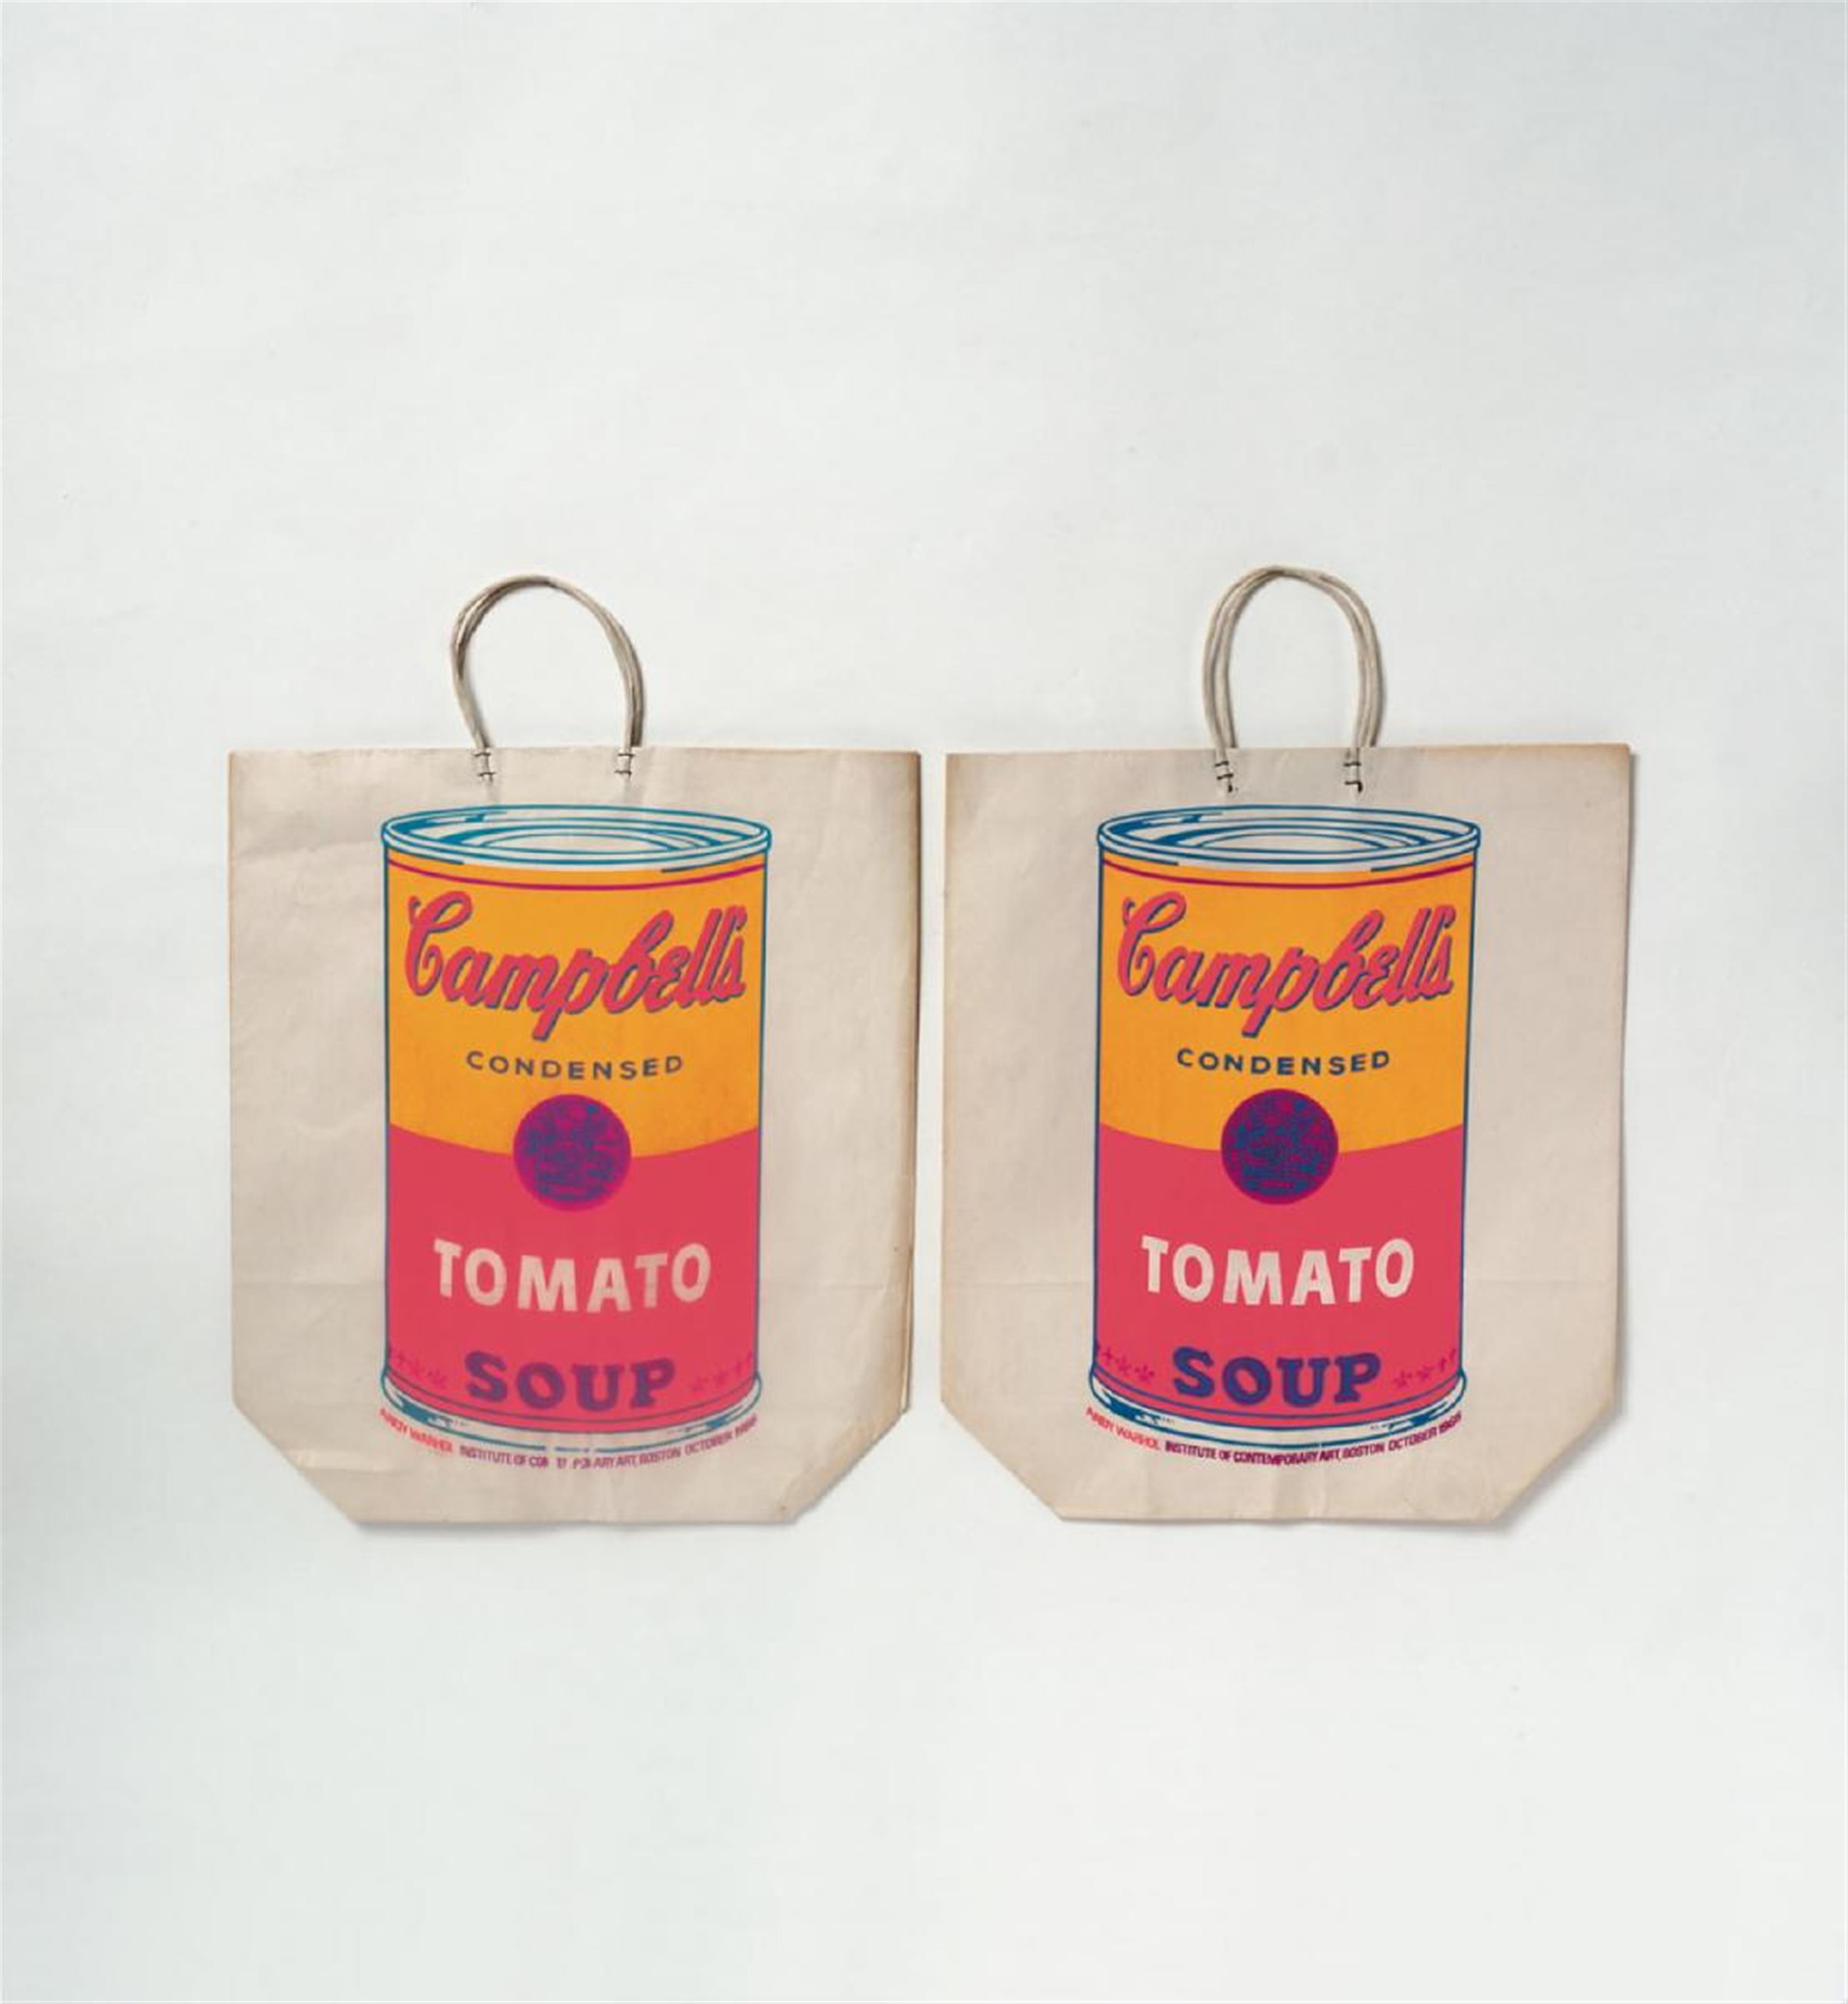 Andy Warhol - Campbell's Soup Can on Shopping Bag - image-1